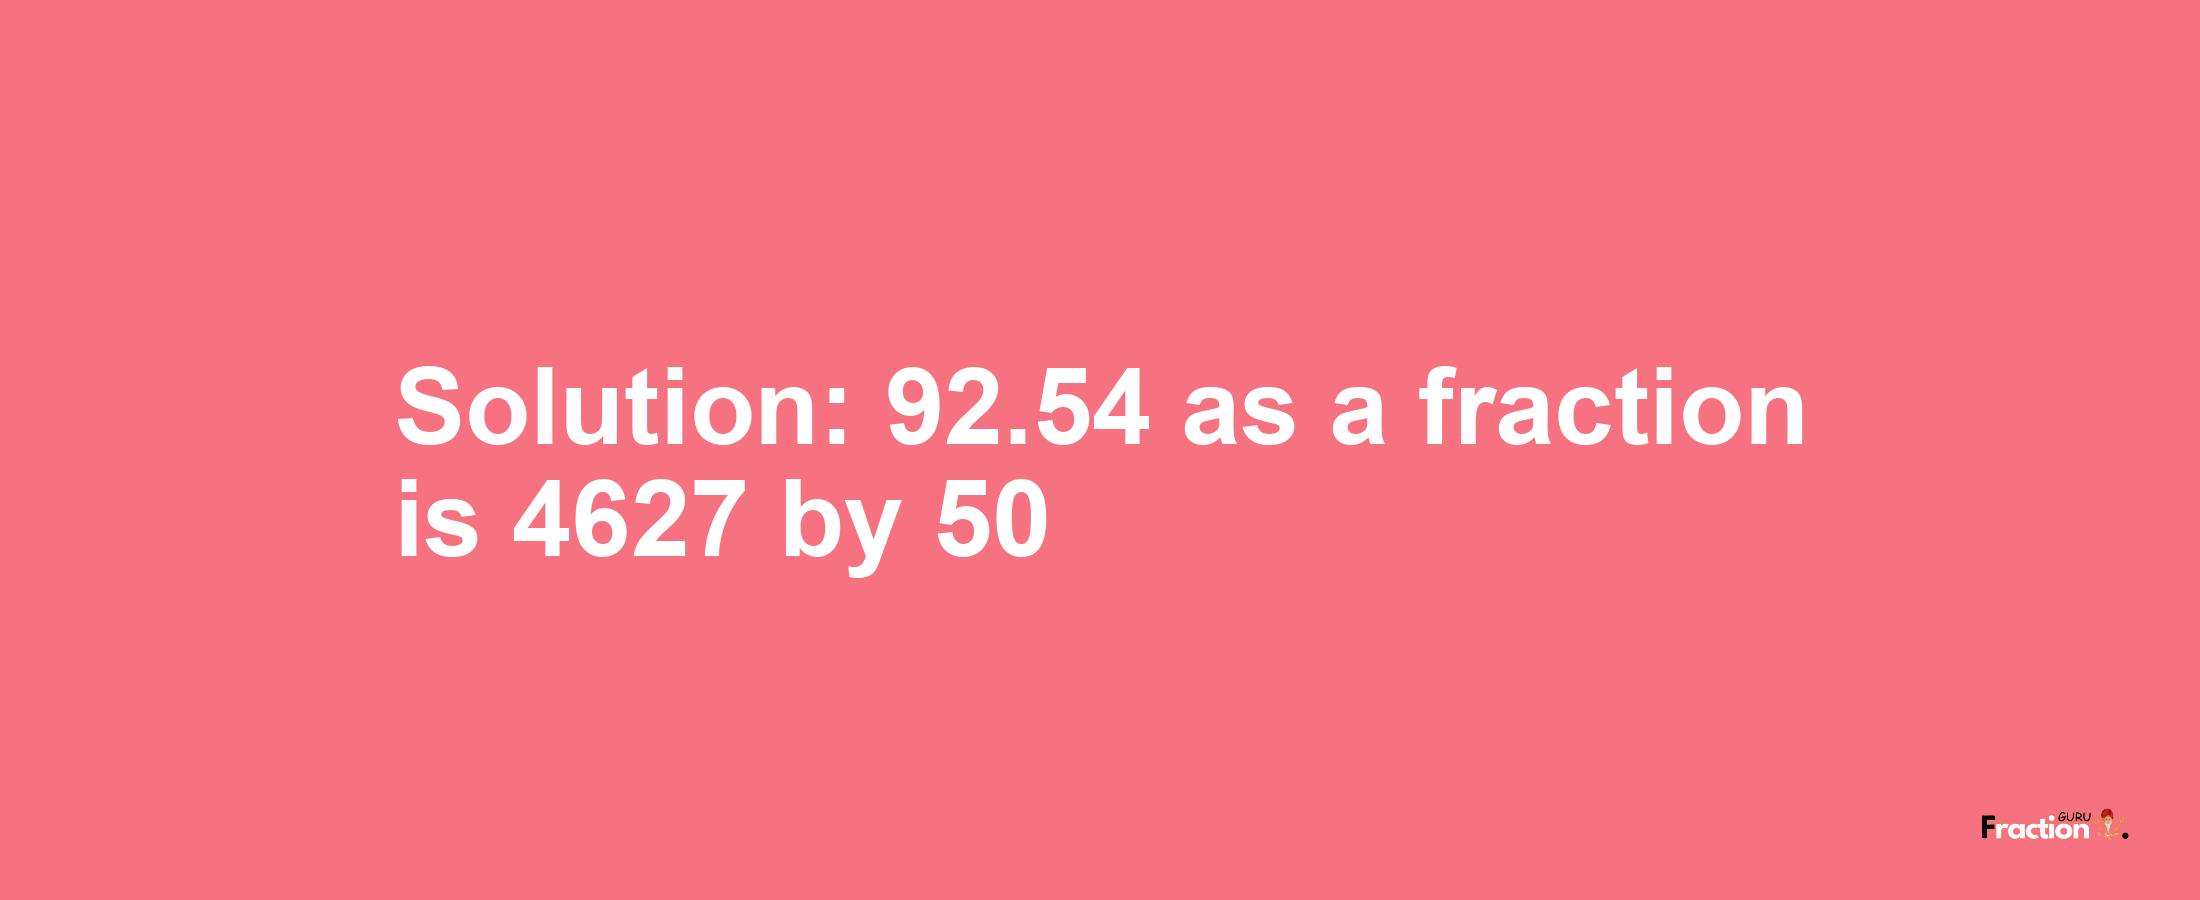 Solution:92.54 as a fraction is 4627/50